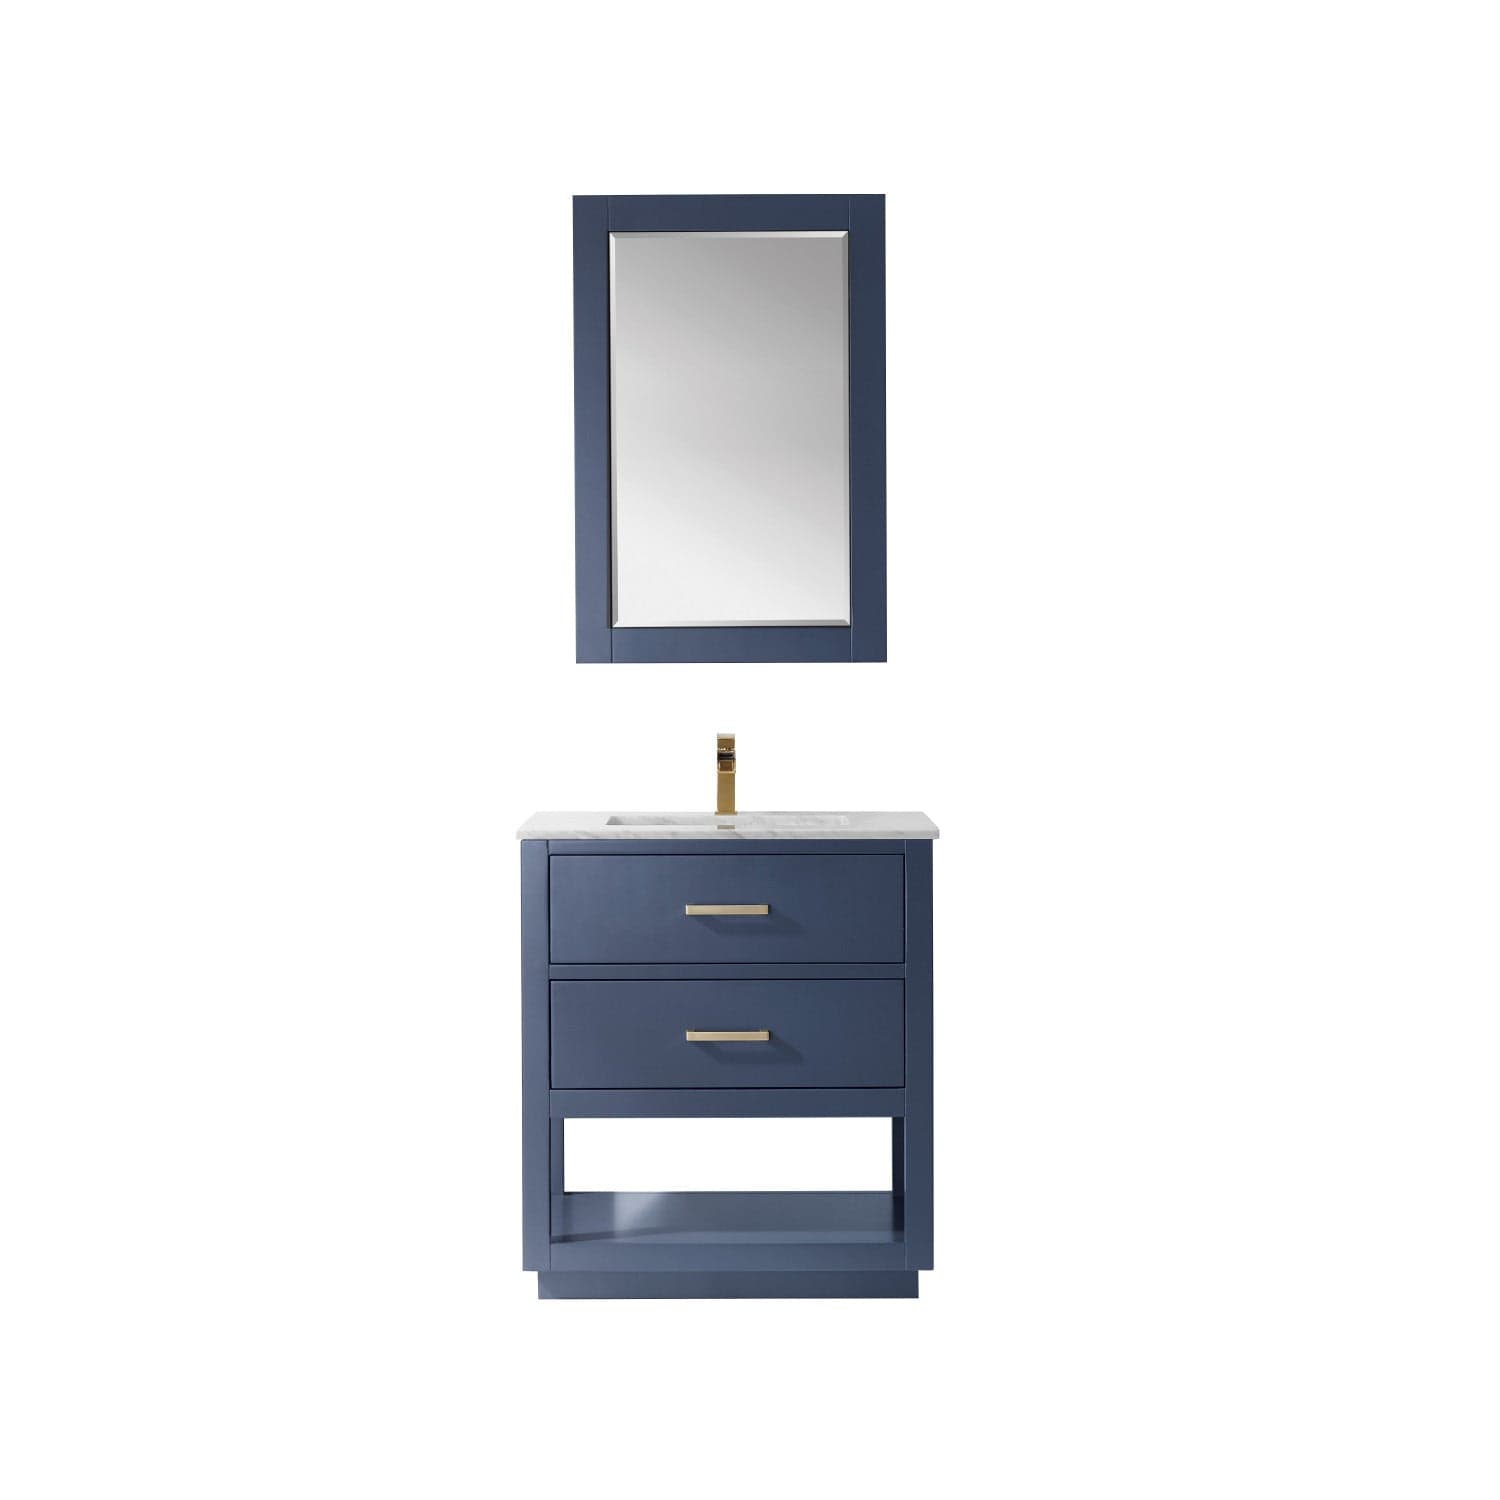 Altair Remi 30" Single Bathroom Vanity Set in Royal Blue and Carrara White Marble Countertop with Mirror 532030-RB-CA - Molaix631112971355Vanity532030-RB-CA